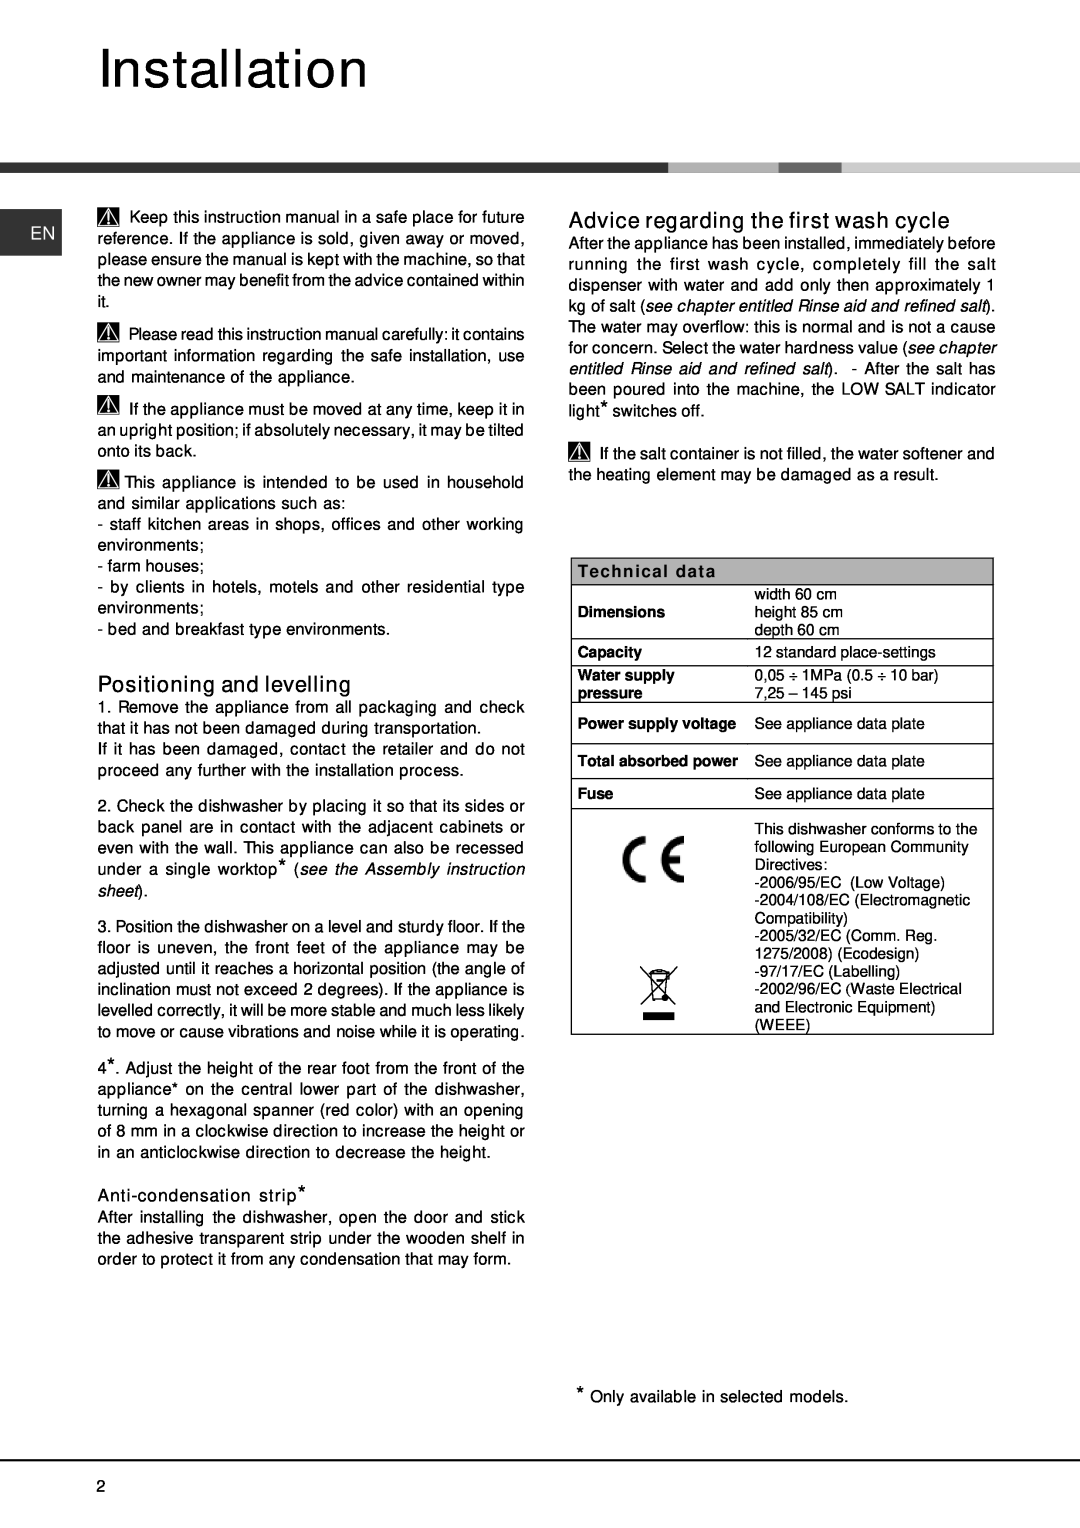 Hotpoint FDFF manual Installation, Positioning and levelling, Advice regarding the first wash cycle 